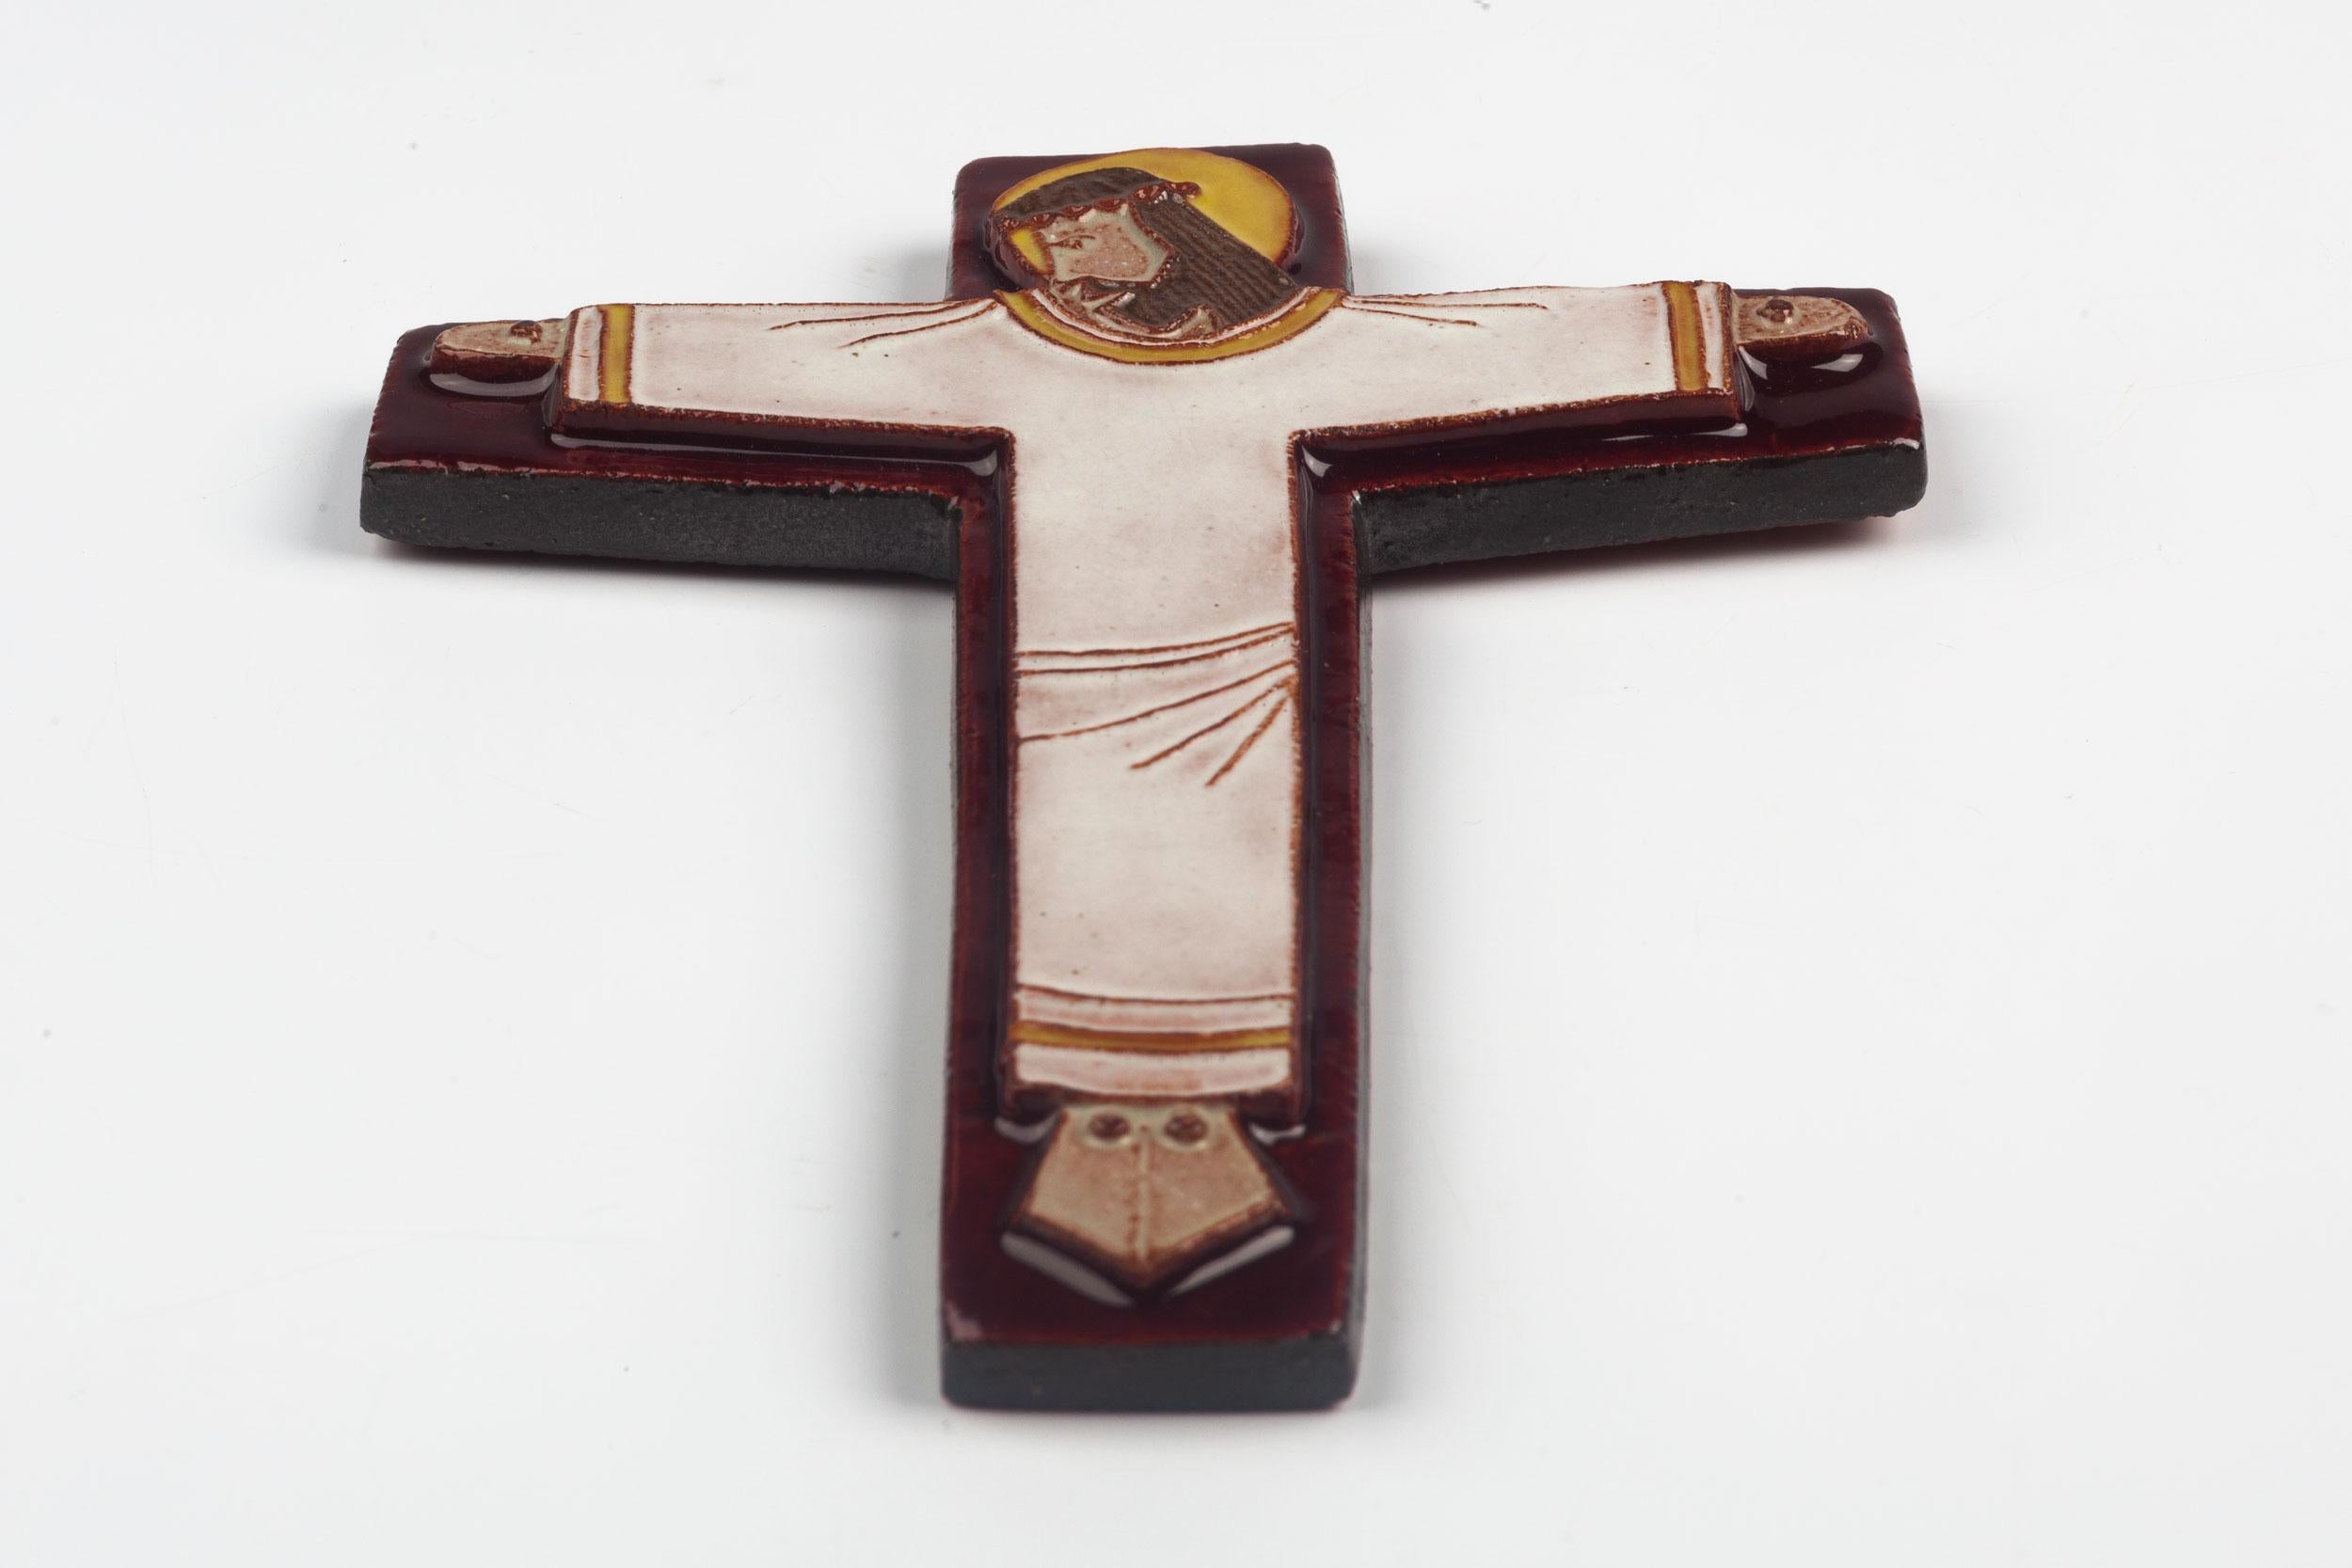 Mid-Century Modern, European crucifix in glazed ceramic, handmade made in Belgium in the 1970s. Red-brown, burgundy cross with yellow, white, brown raised christ figure at its center.

This piece is part of a large ceramic crucifix collection, all